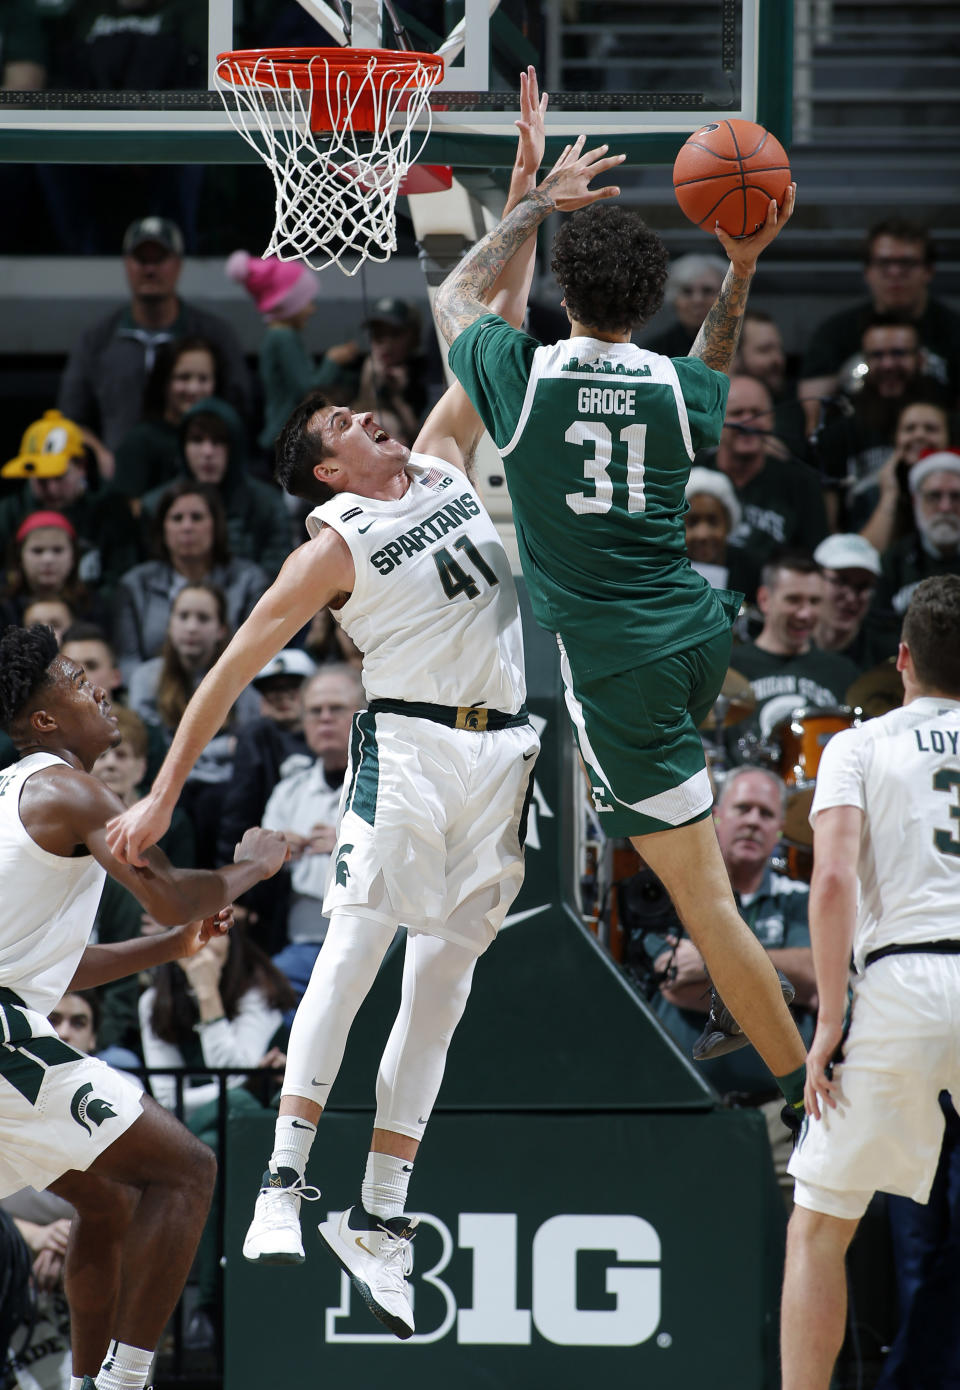 Eastern Michigan's Ty Groce (31) goes up against the defense of Michigan State's Conner George (41) during the second half of an NCAA college basketball game, Saturday, Dec. 21, 2019, in East Lansing, Mich. (AP Photo/Al Goldis)